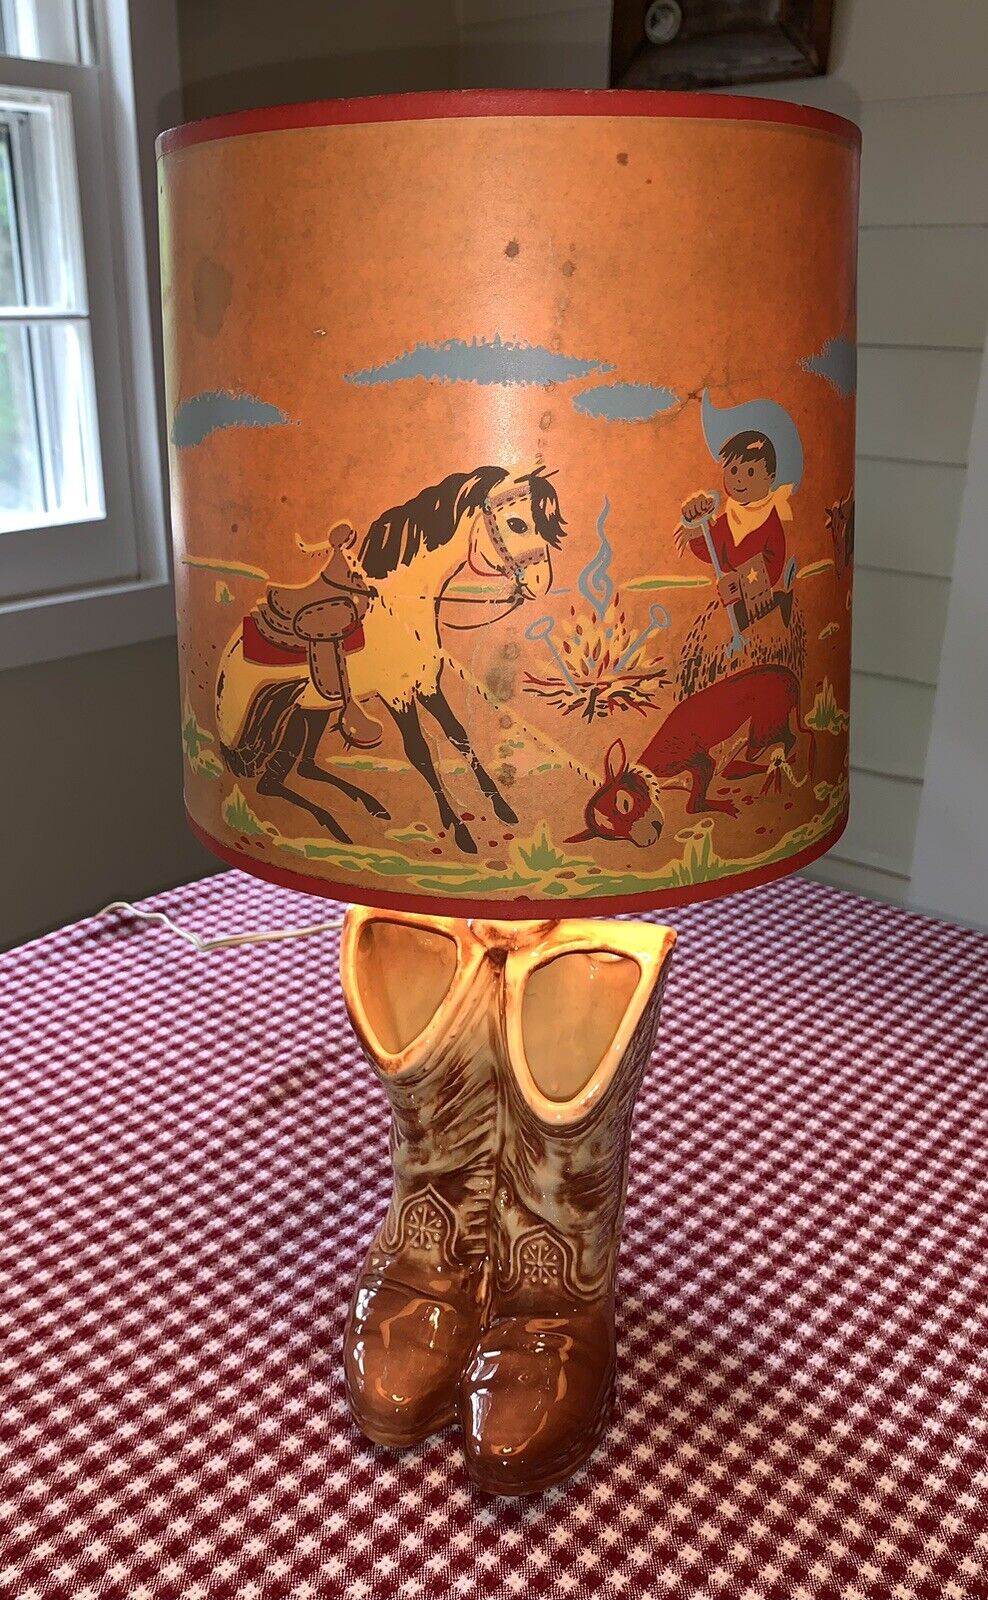 McCoy Cowboy Boots Table Lamp 10.5” VINTAGE with Original Shade WORKS